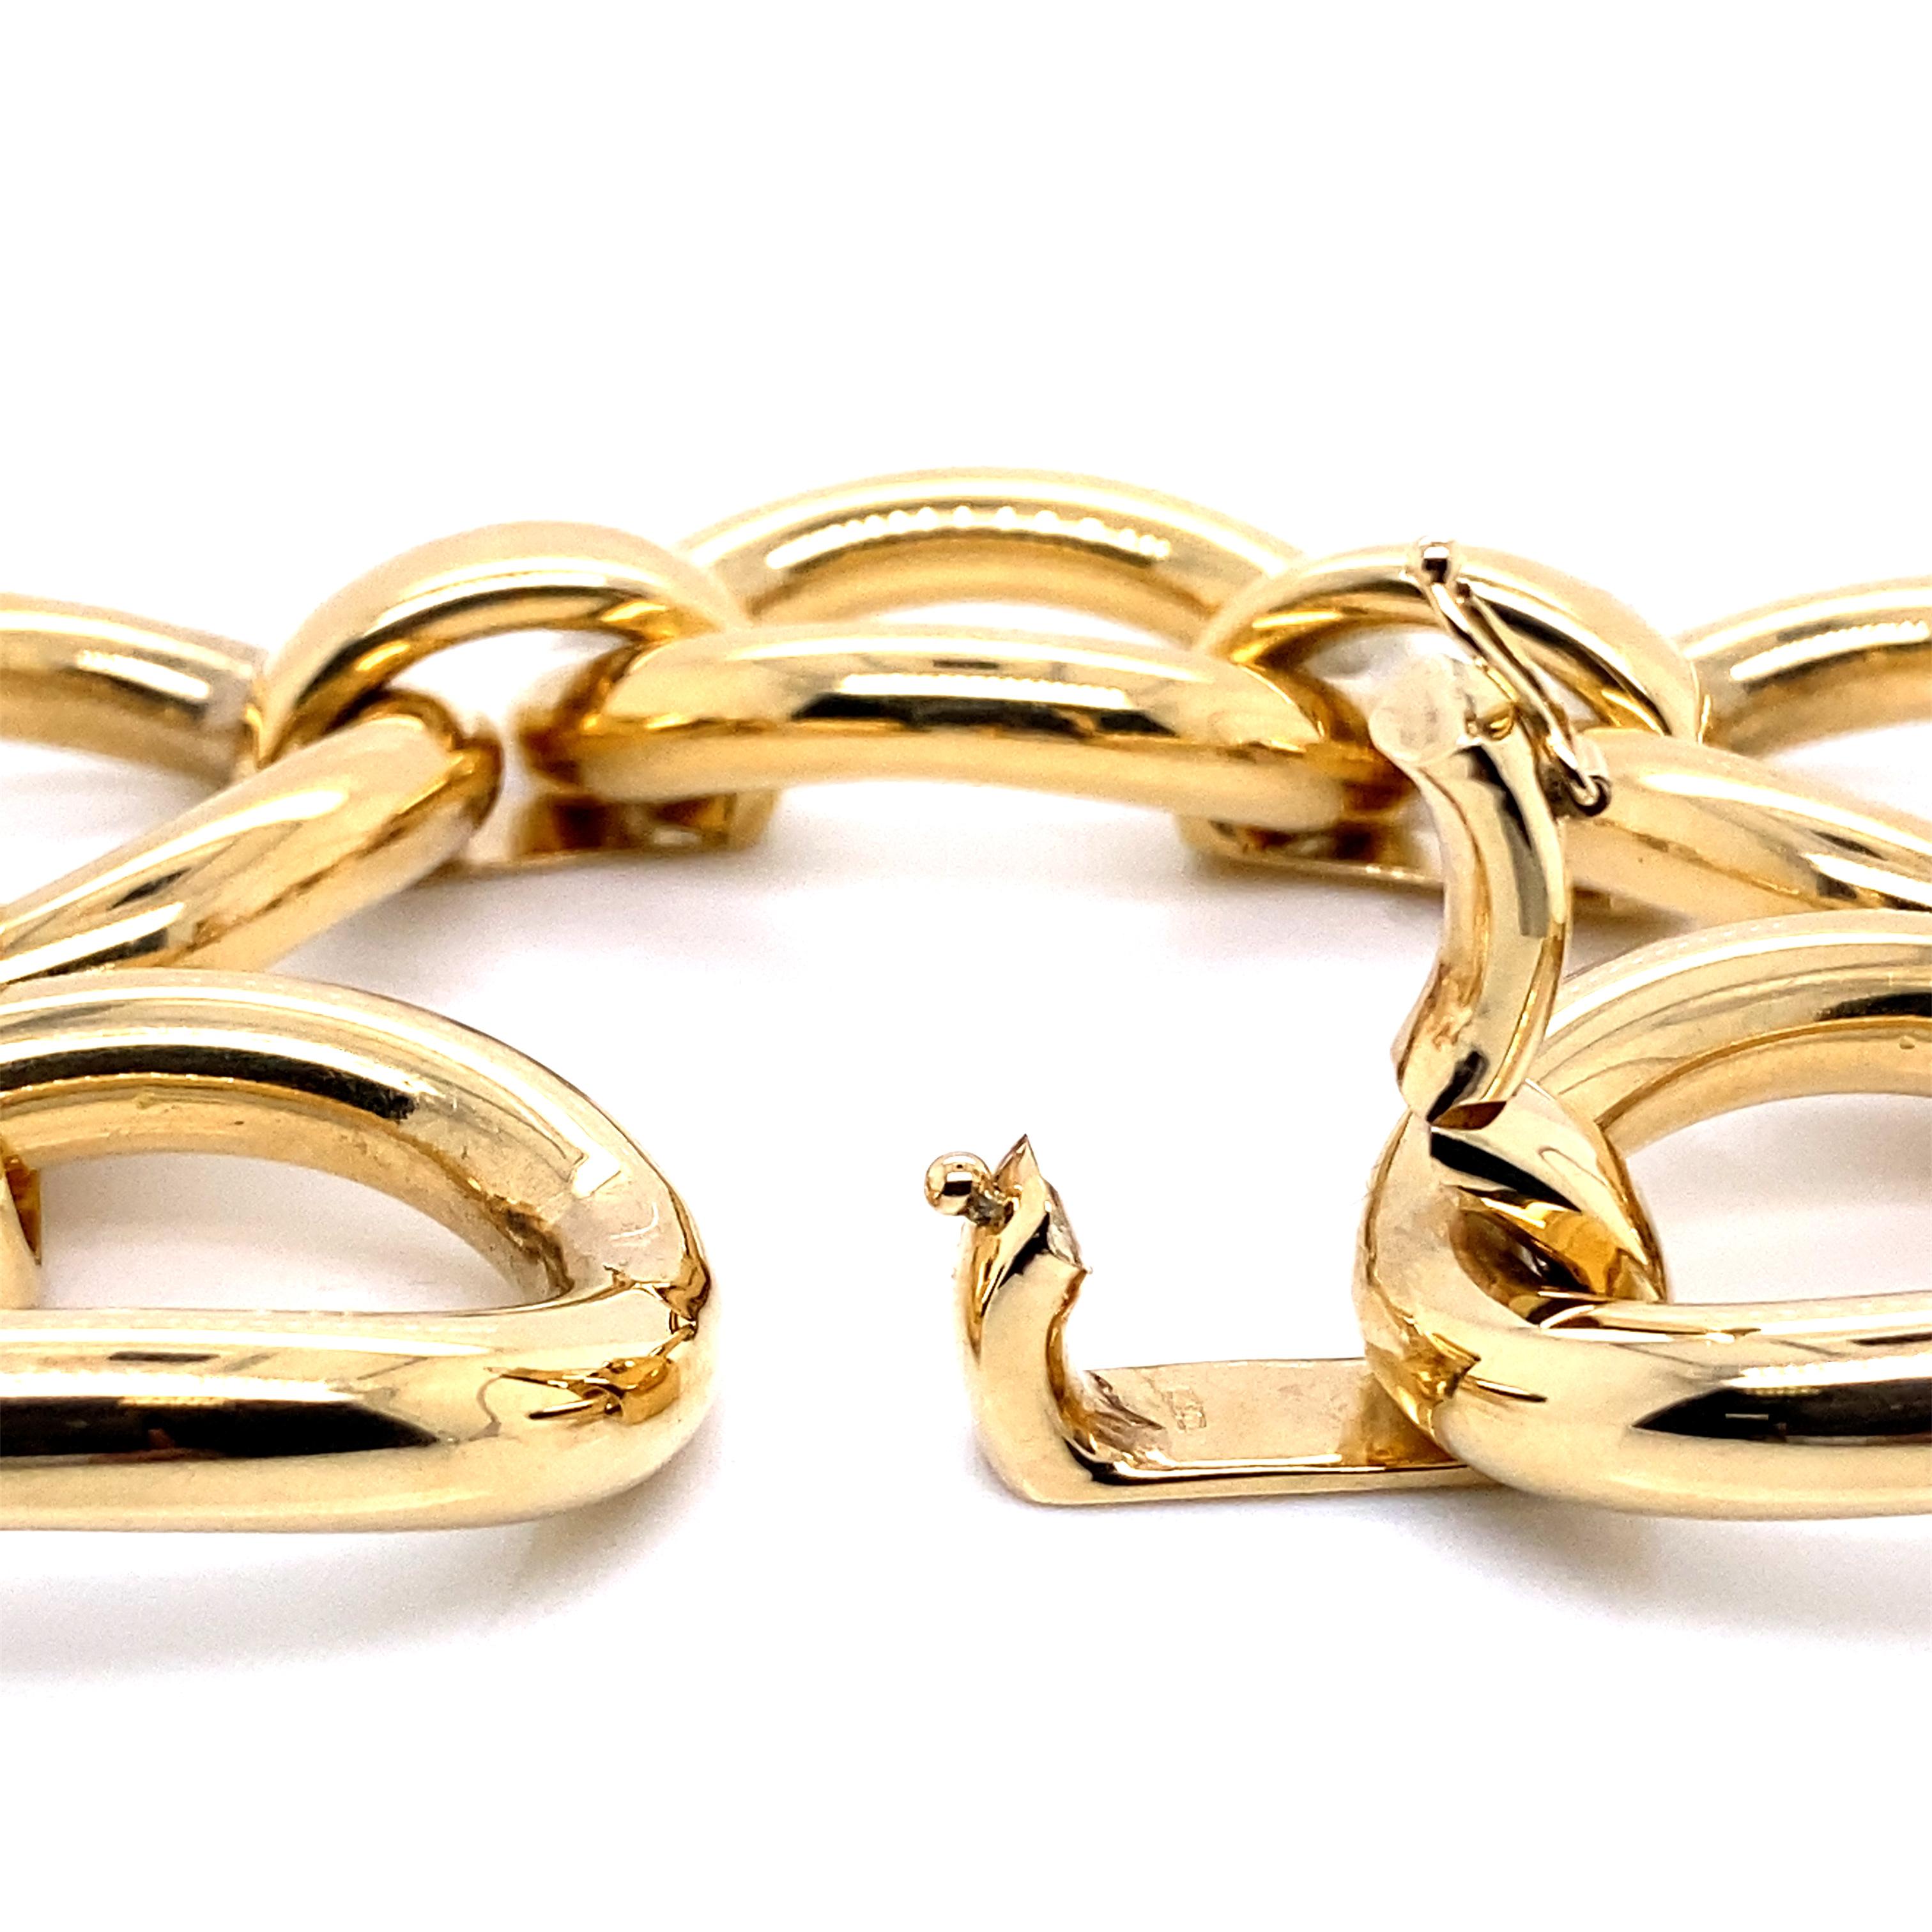 Women's Yellow Gold Bracelet Accompanied by Oval Links with Gadroons